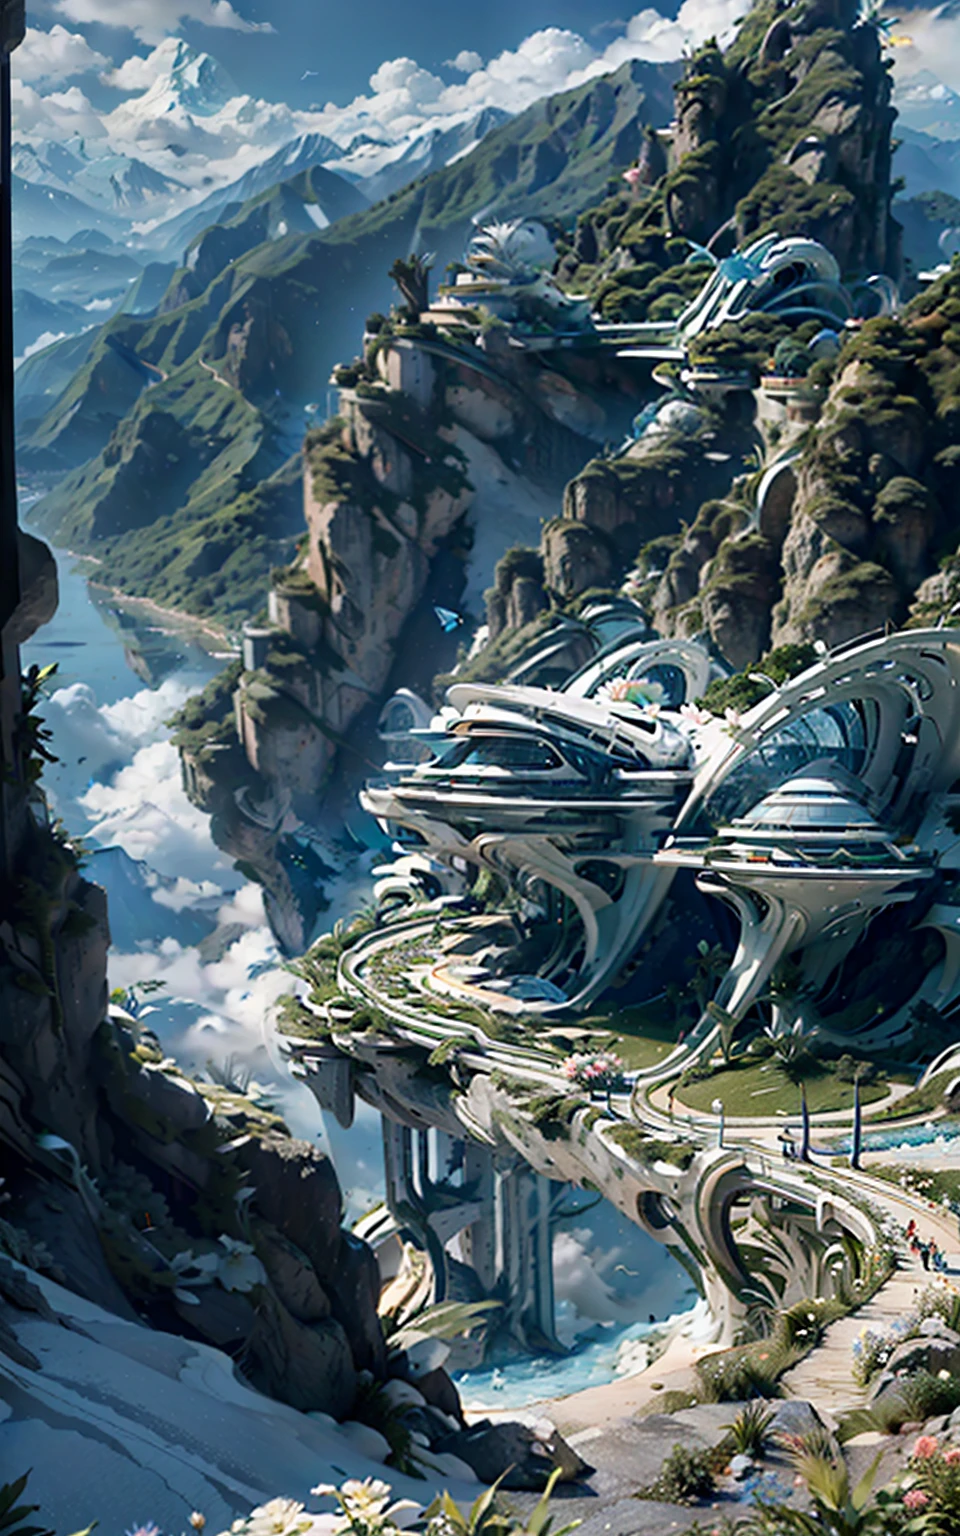 ((by Zaha Hadid)),
a villa on a high mountain cliff,shell element,crazy curve,((the verdant mountainresh flower)),butterfly fluttering,blue sky,white cloud,the sun is shining brightly,bright glass,science fiction curved bridge,